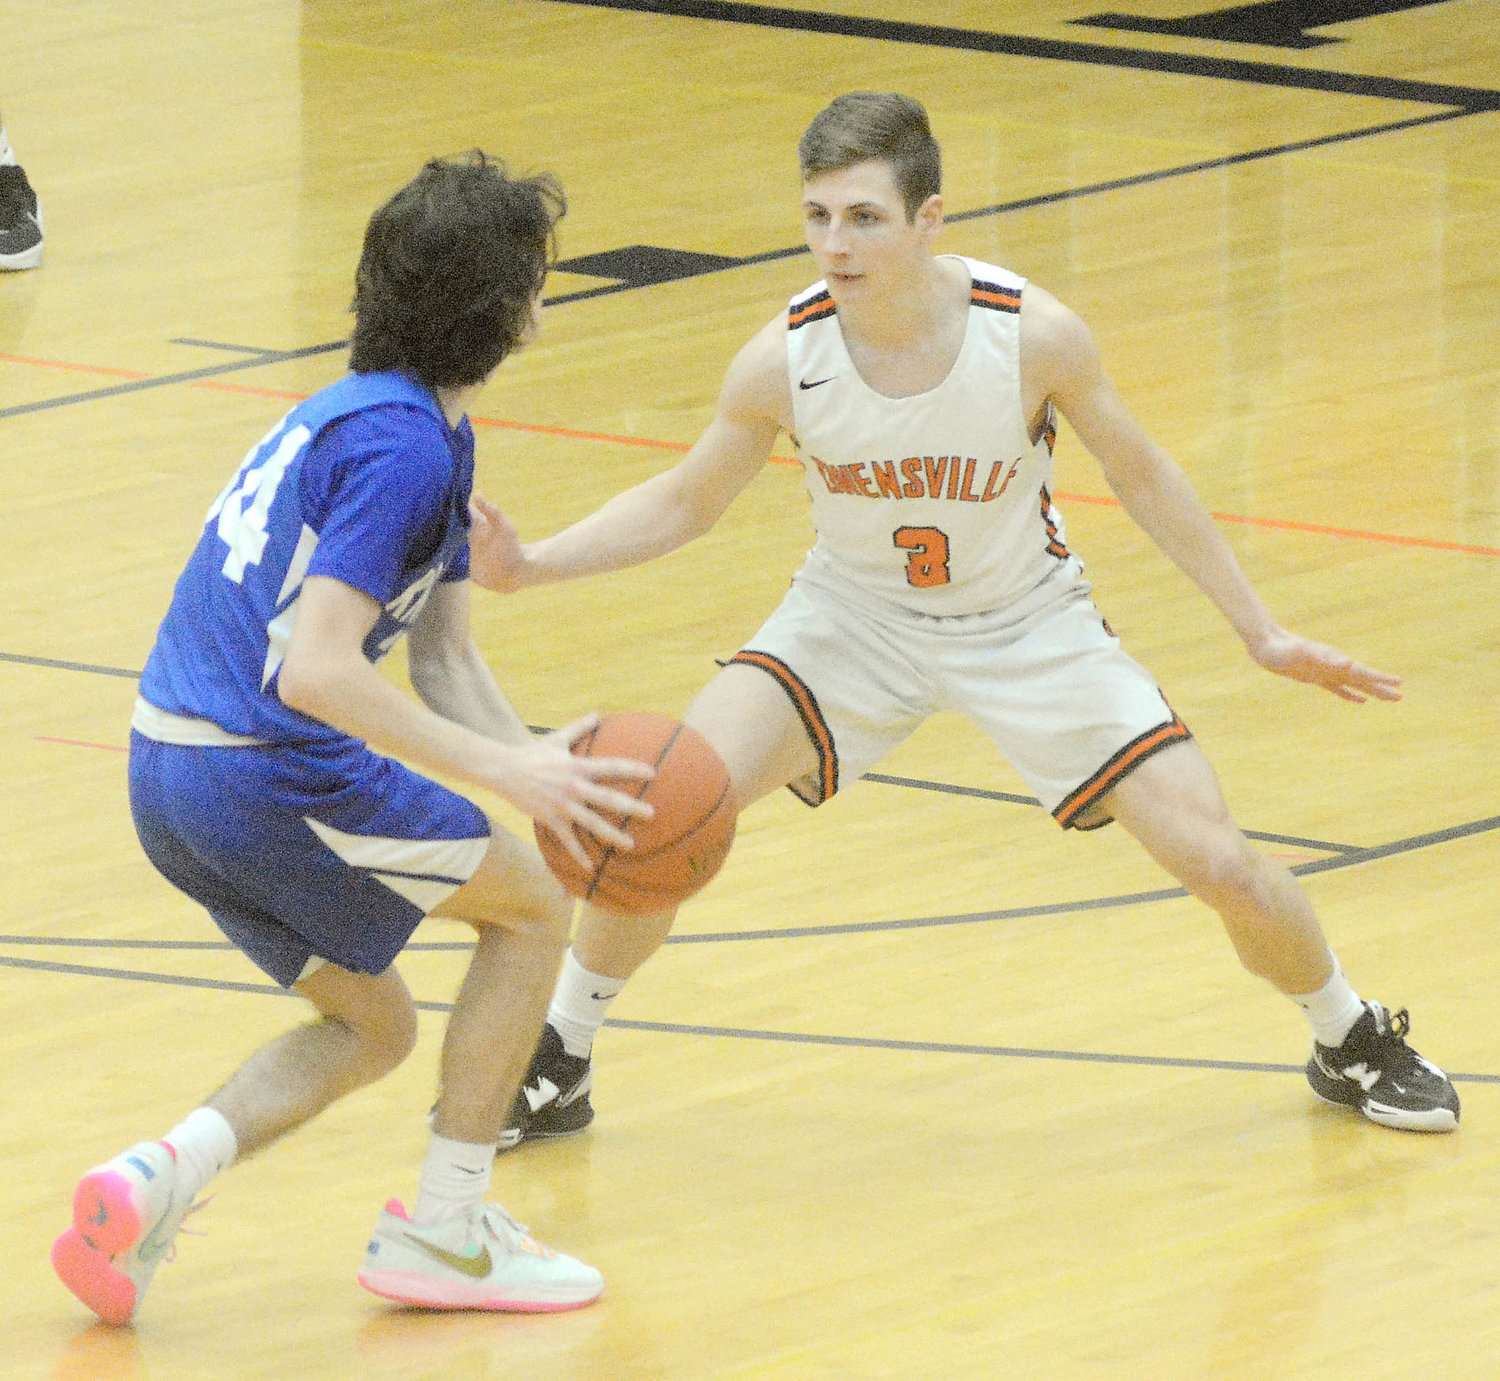 Austin Luecke (above, right) assumes his defensive stance late Friday afternoon guarding Isiah Tucker during the seventh-place game of the 34th Owensville Varsity Boys Basketball Tournament presented by The Maries County Bank. Luecke and his Dutchmen teammates went on to defeat the St. Louis JV Blue Knights 72-49. Hosting Steelville’s Cardinals last night (Tuesday) OHS will have nine days to prepare for the trip to Frontenac, Ks., and the Kansas National Guard Basketball Tournament from Jan. 19-21.